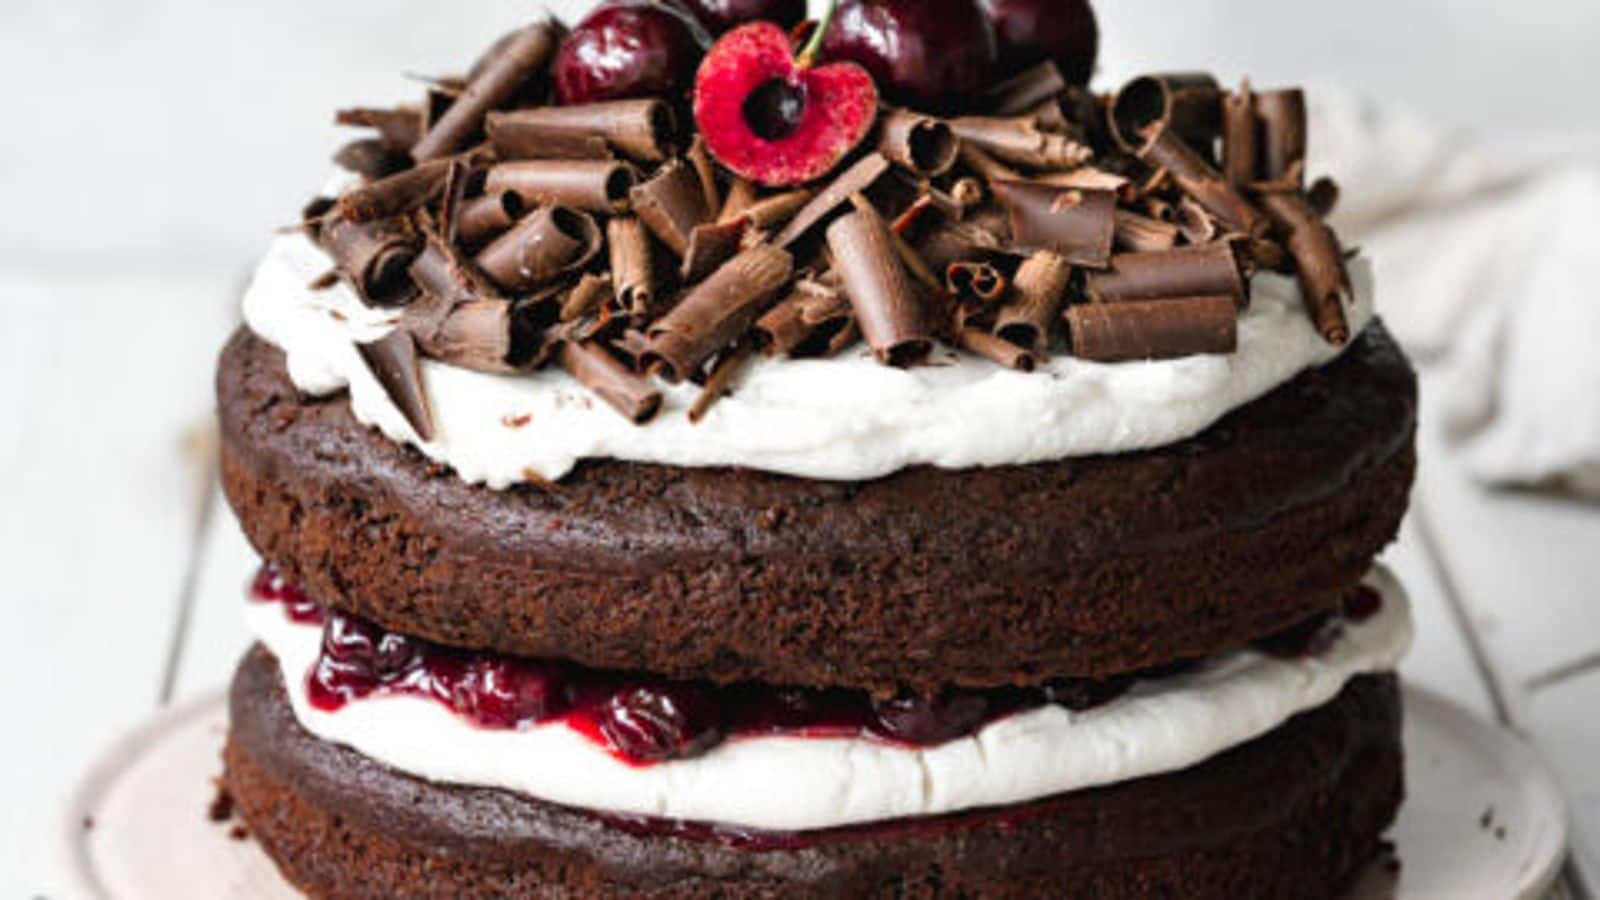 Whip up this decadent vegan black forest cake